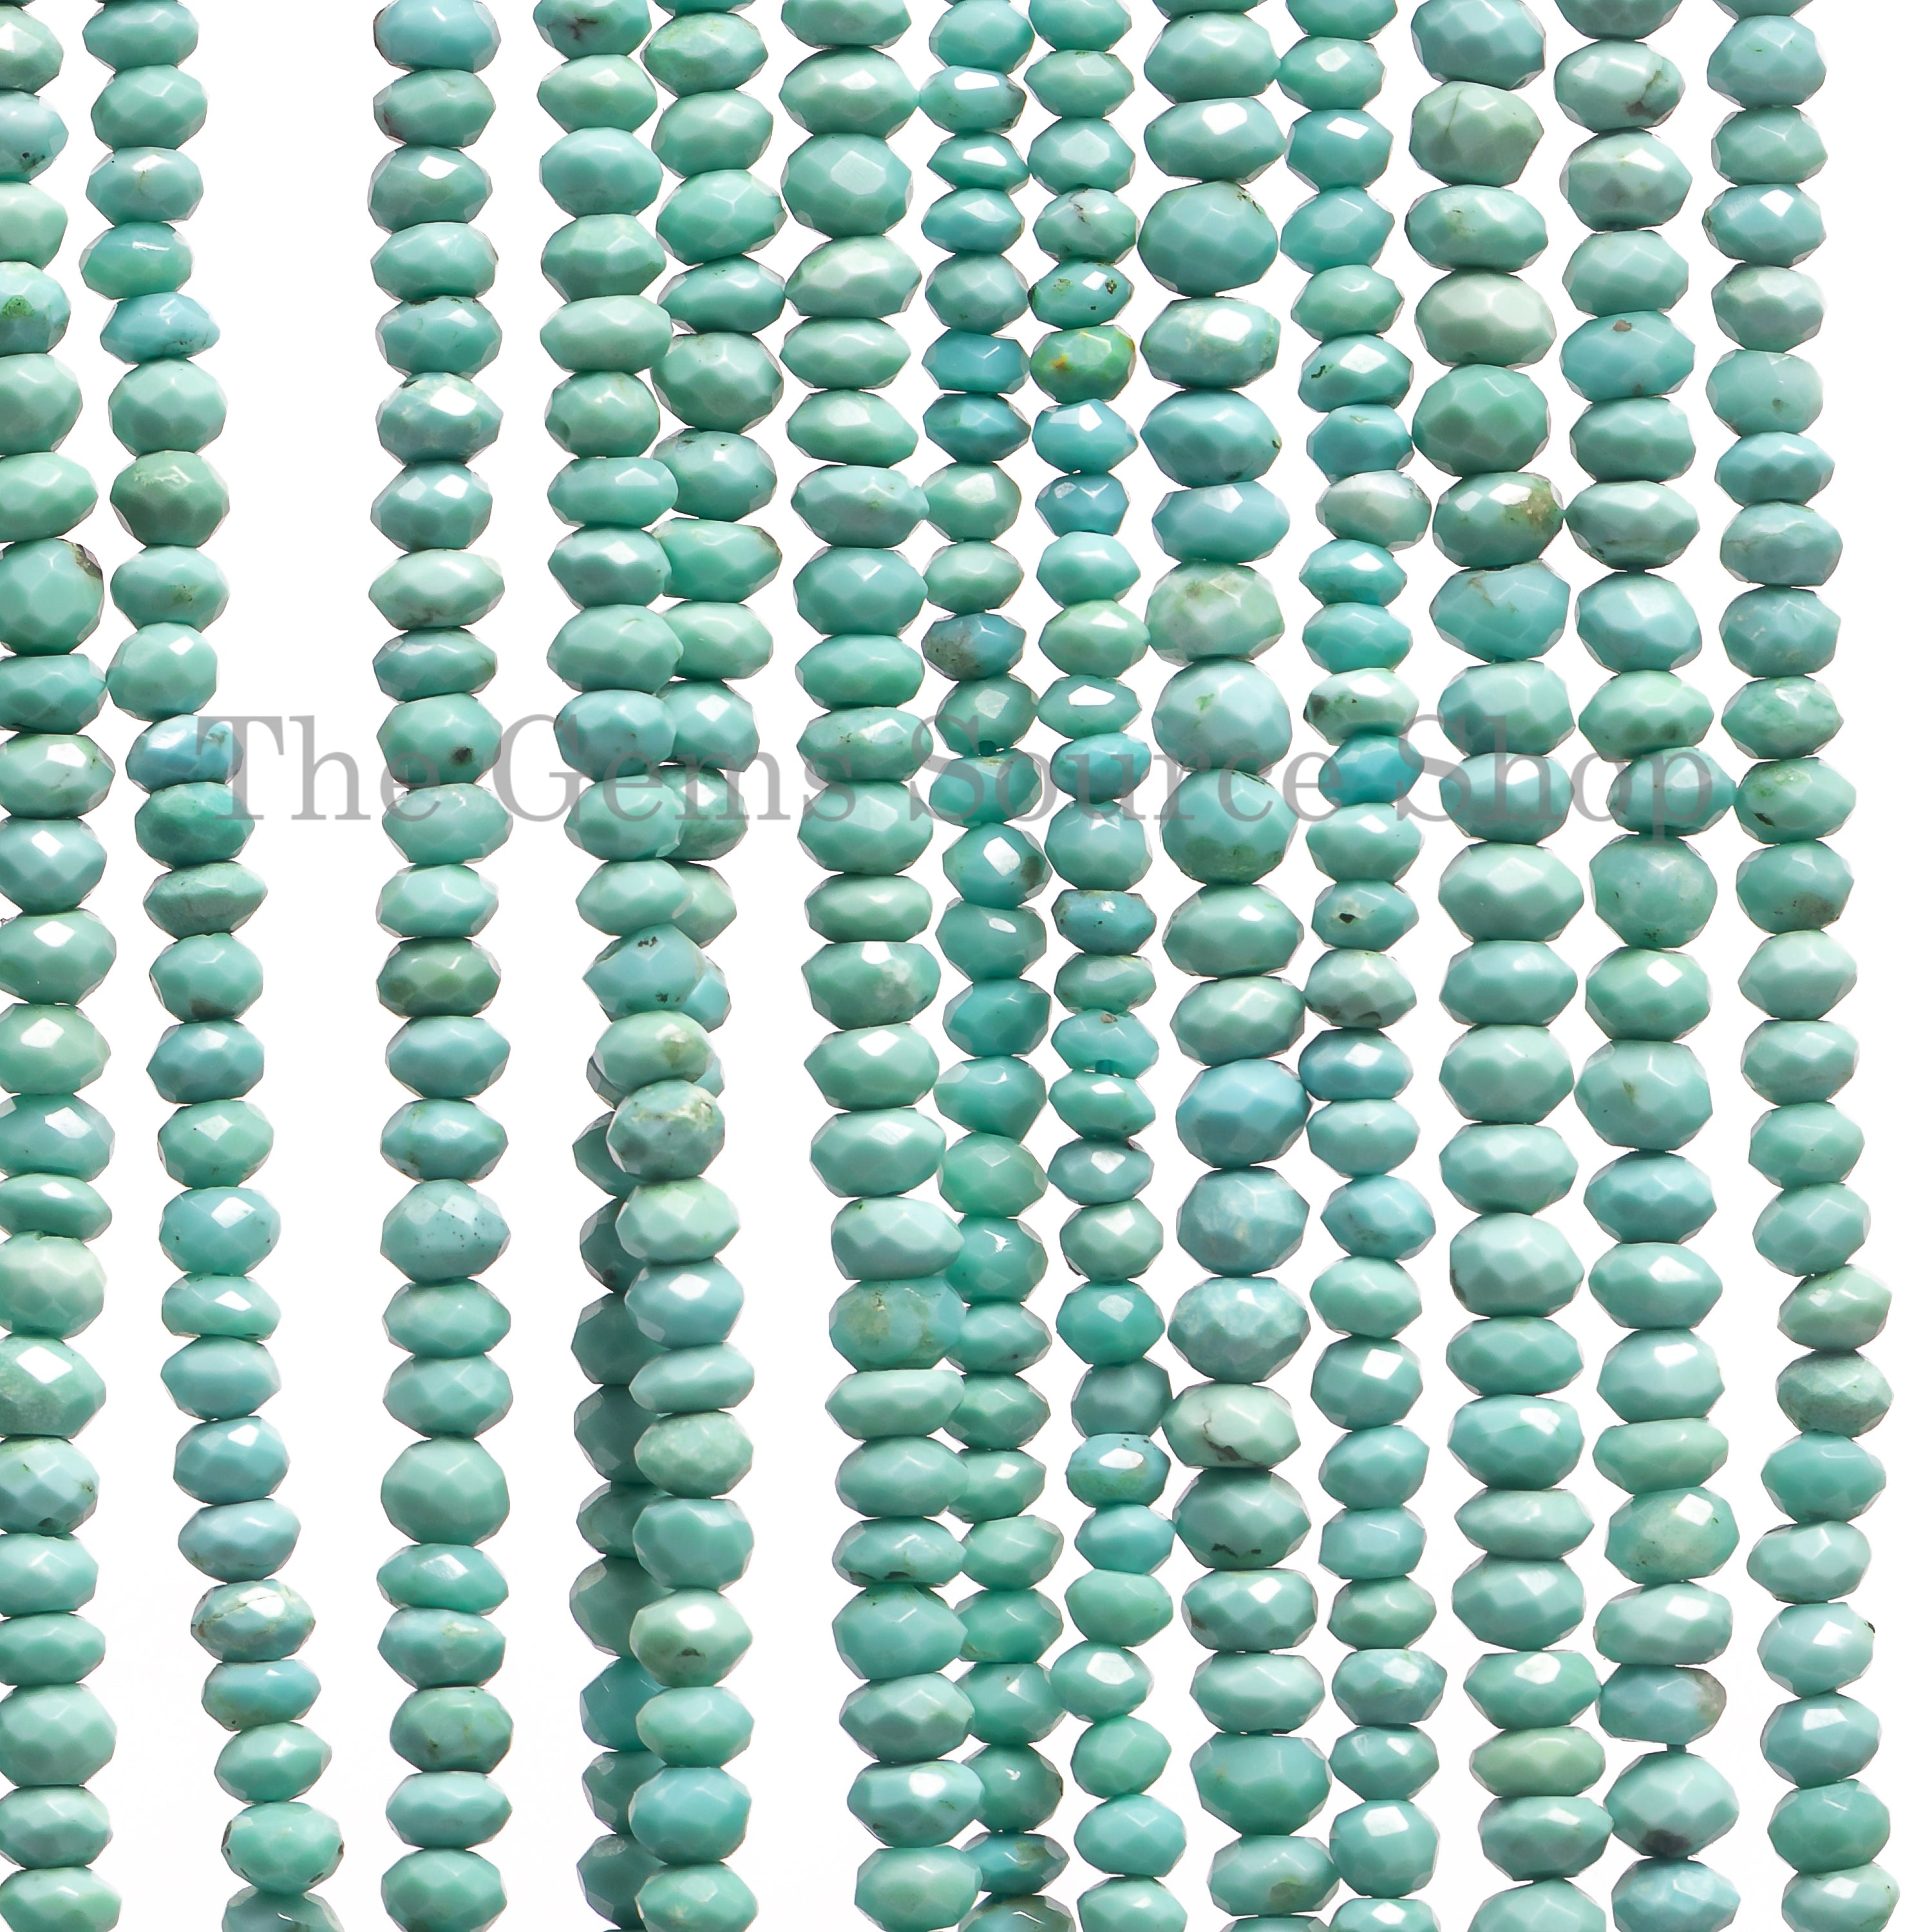 3.25-4mm Turquoise Faceted Rondelle Shape Beads TGS-4530